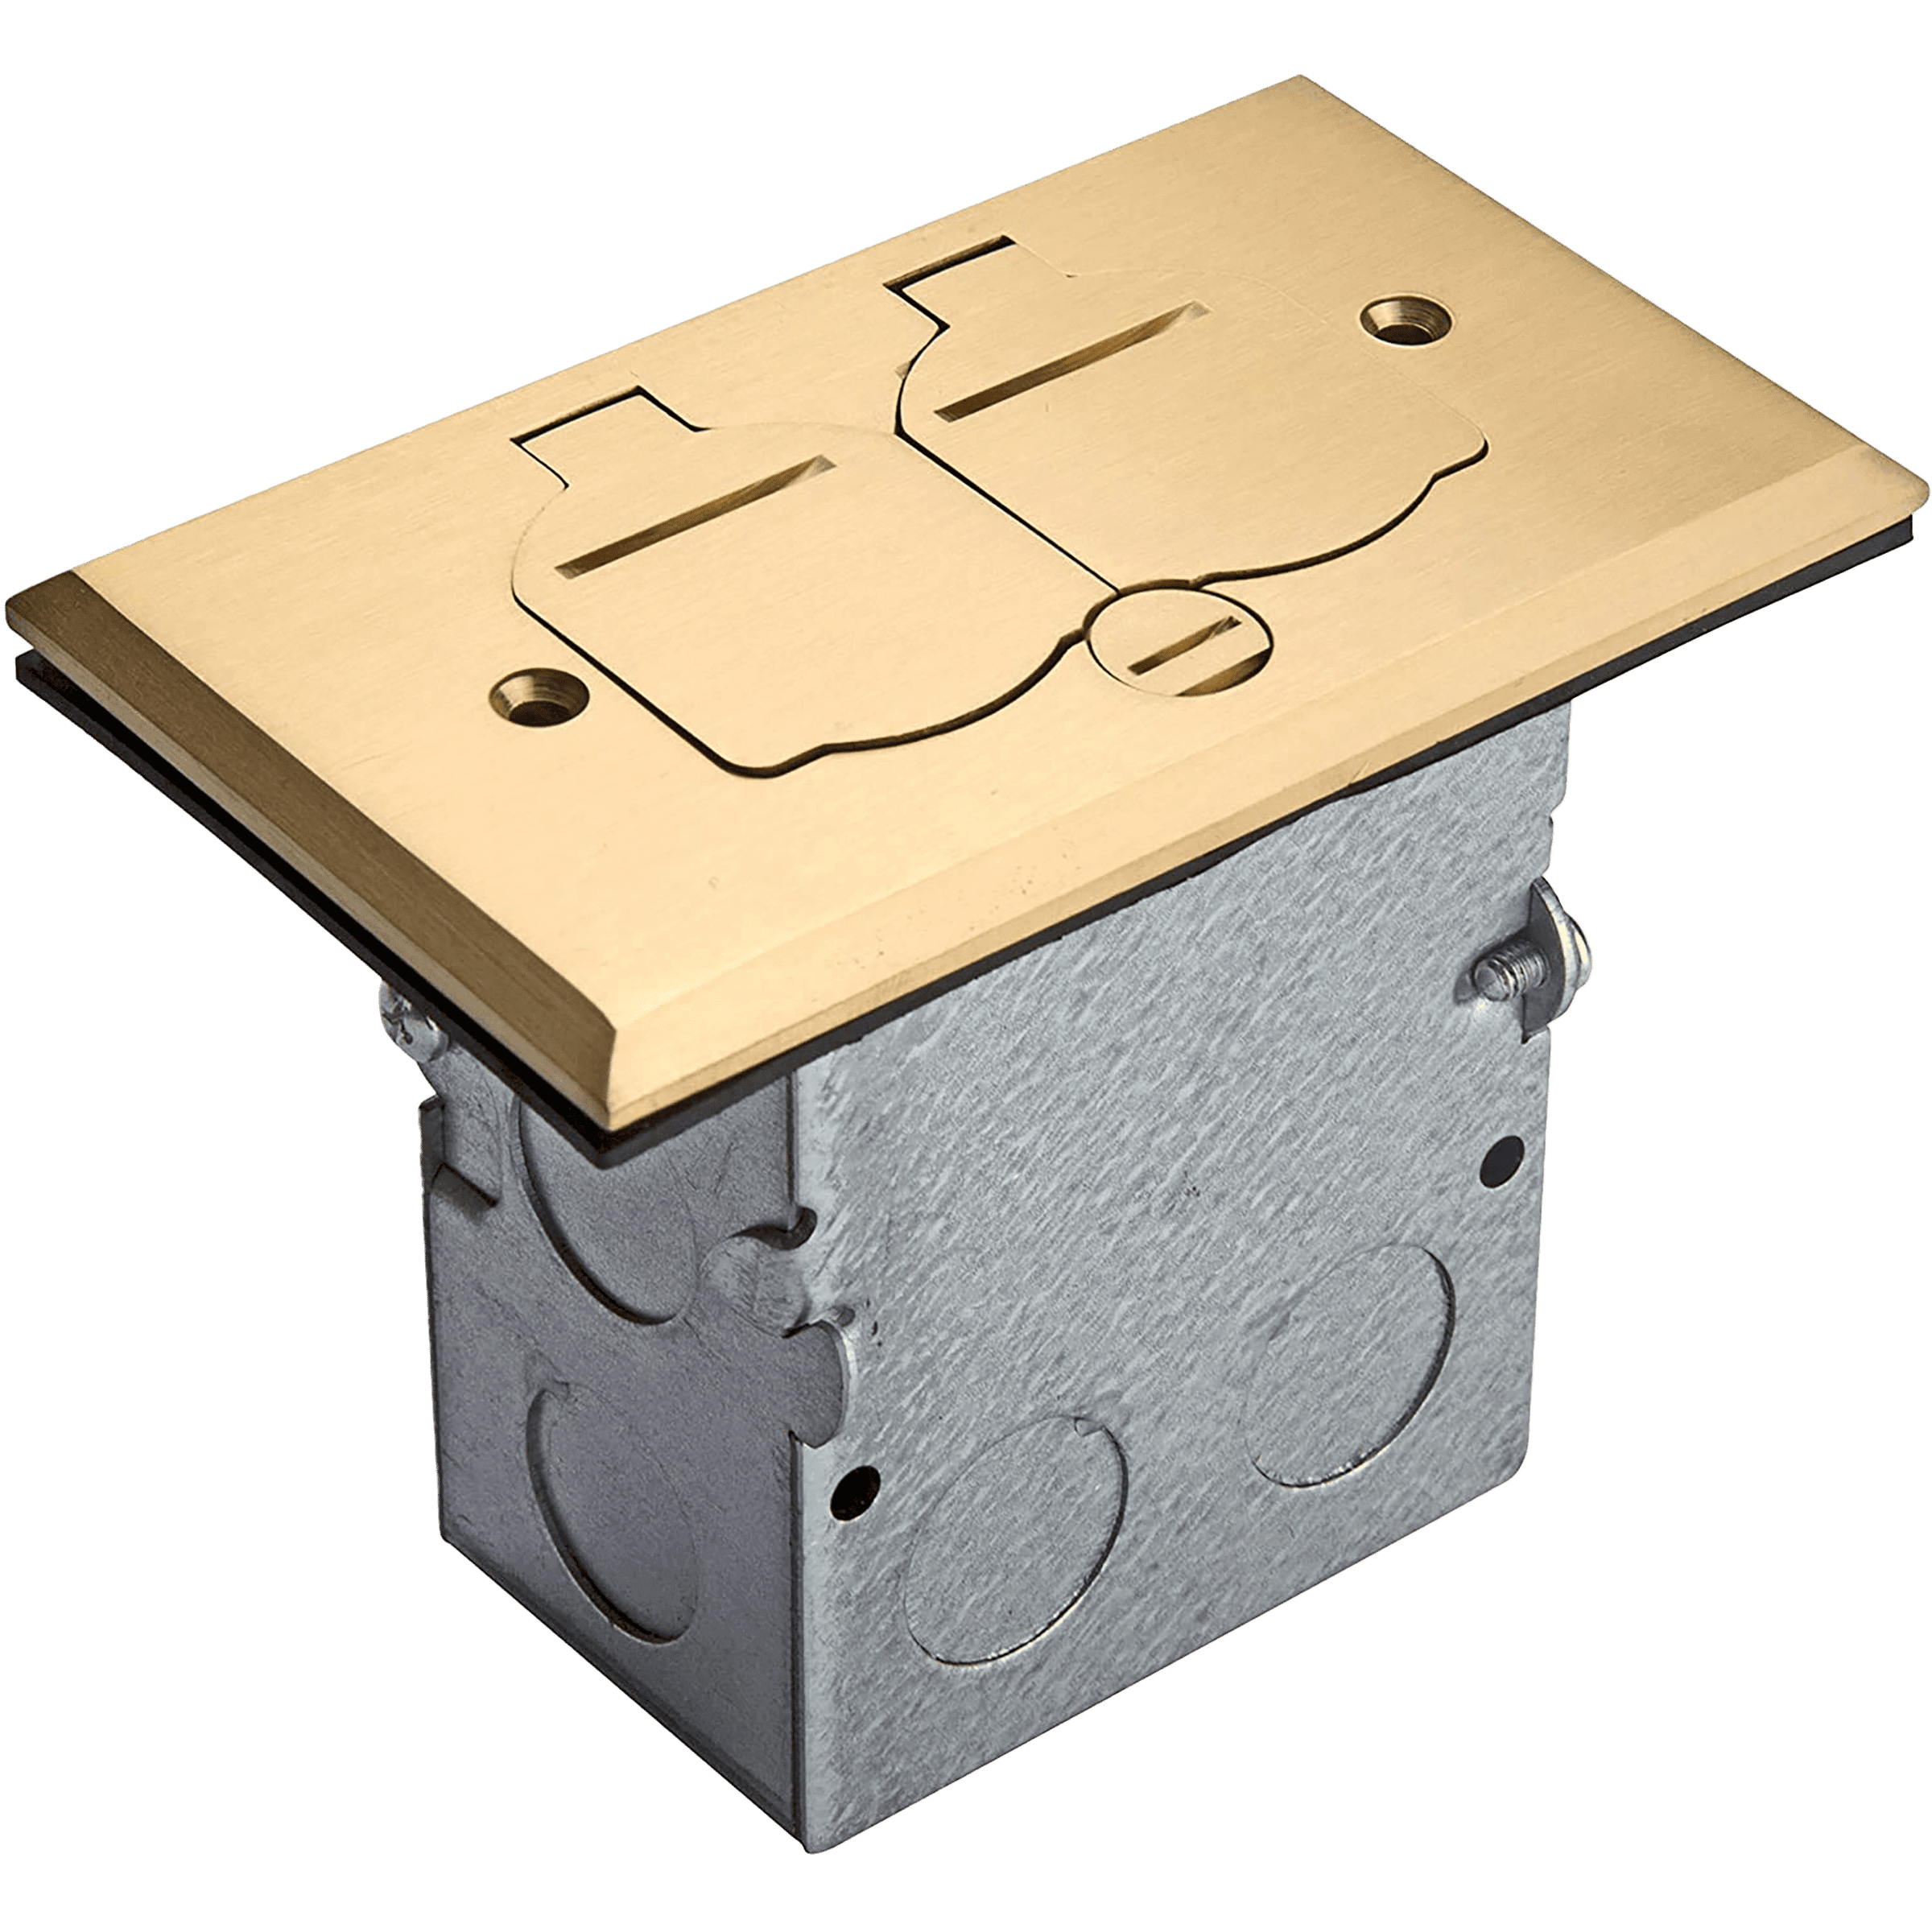 Tamper-Resistant Floor Box Brass Cover, Floor Boxes, Electrical Boxes